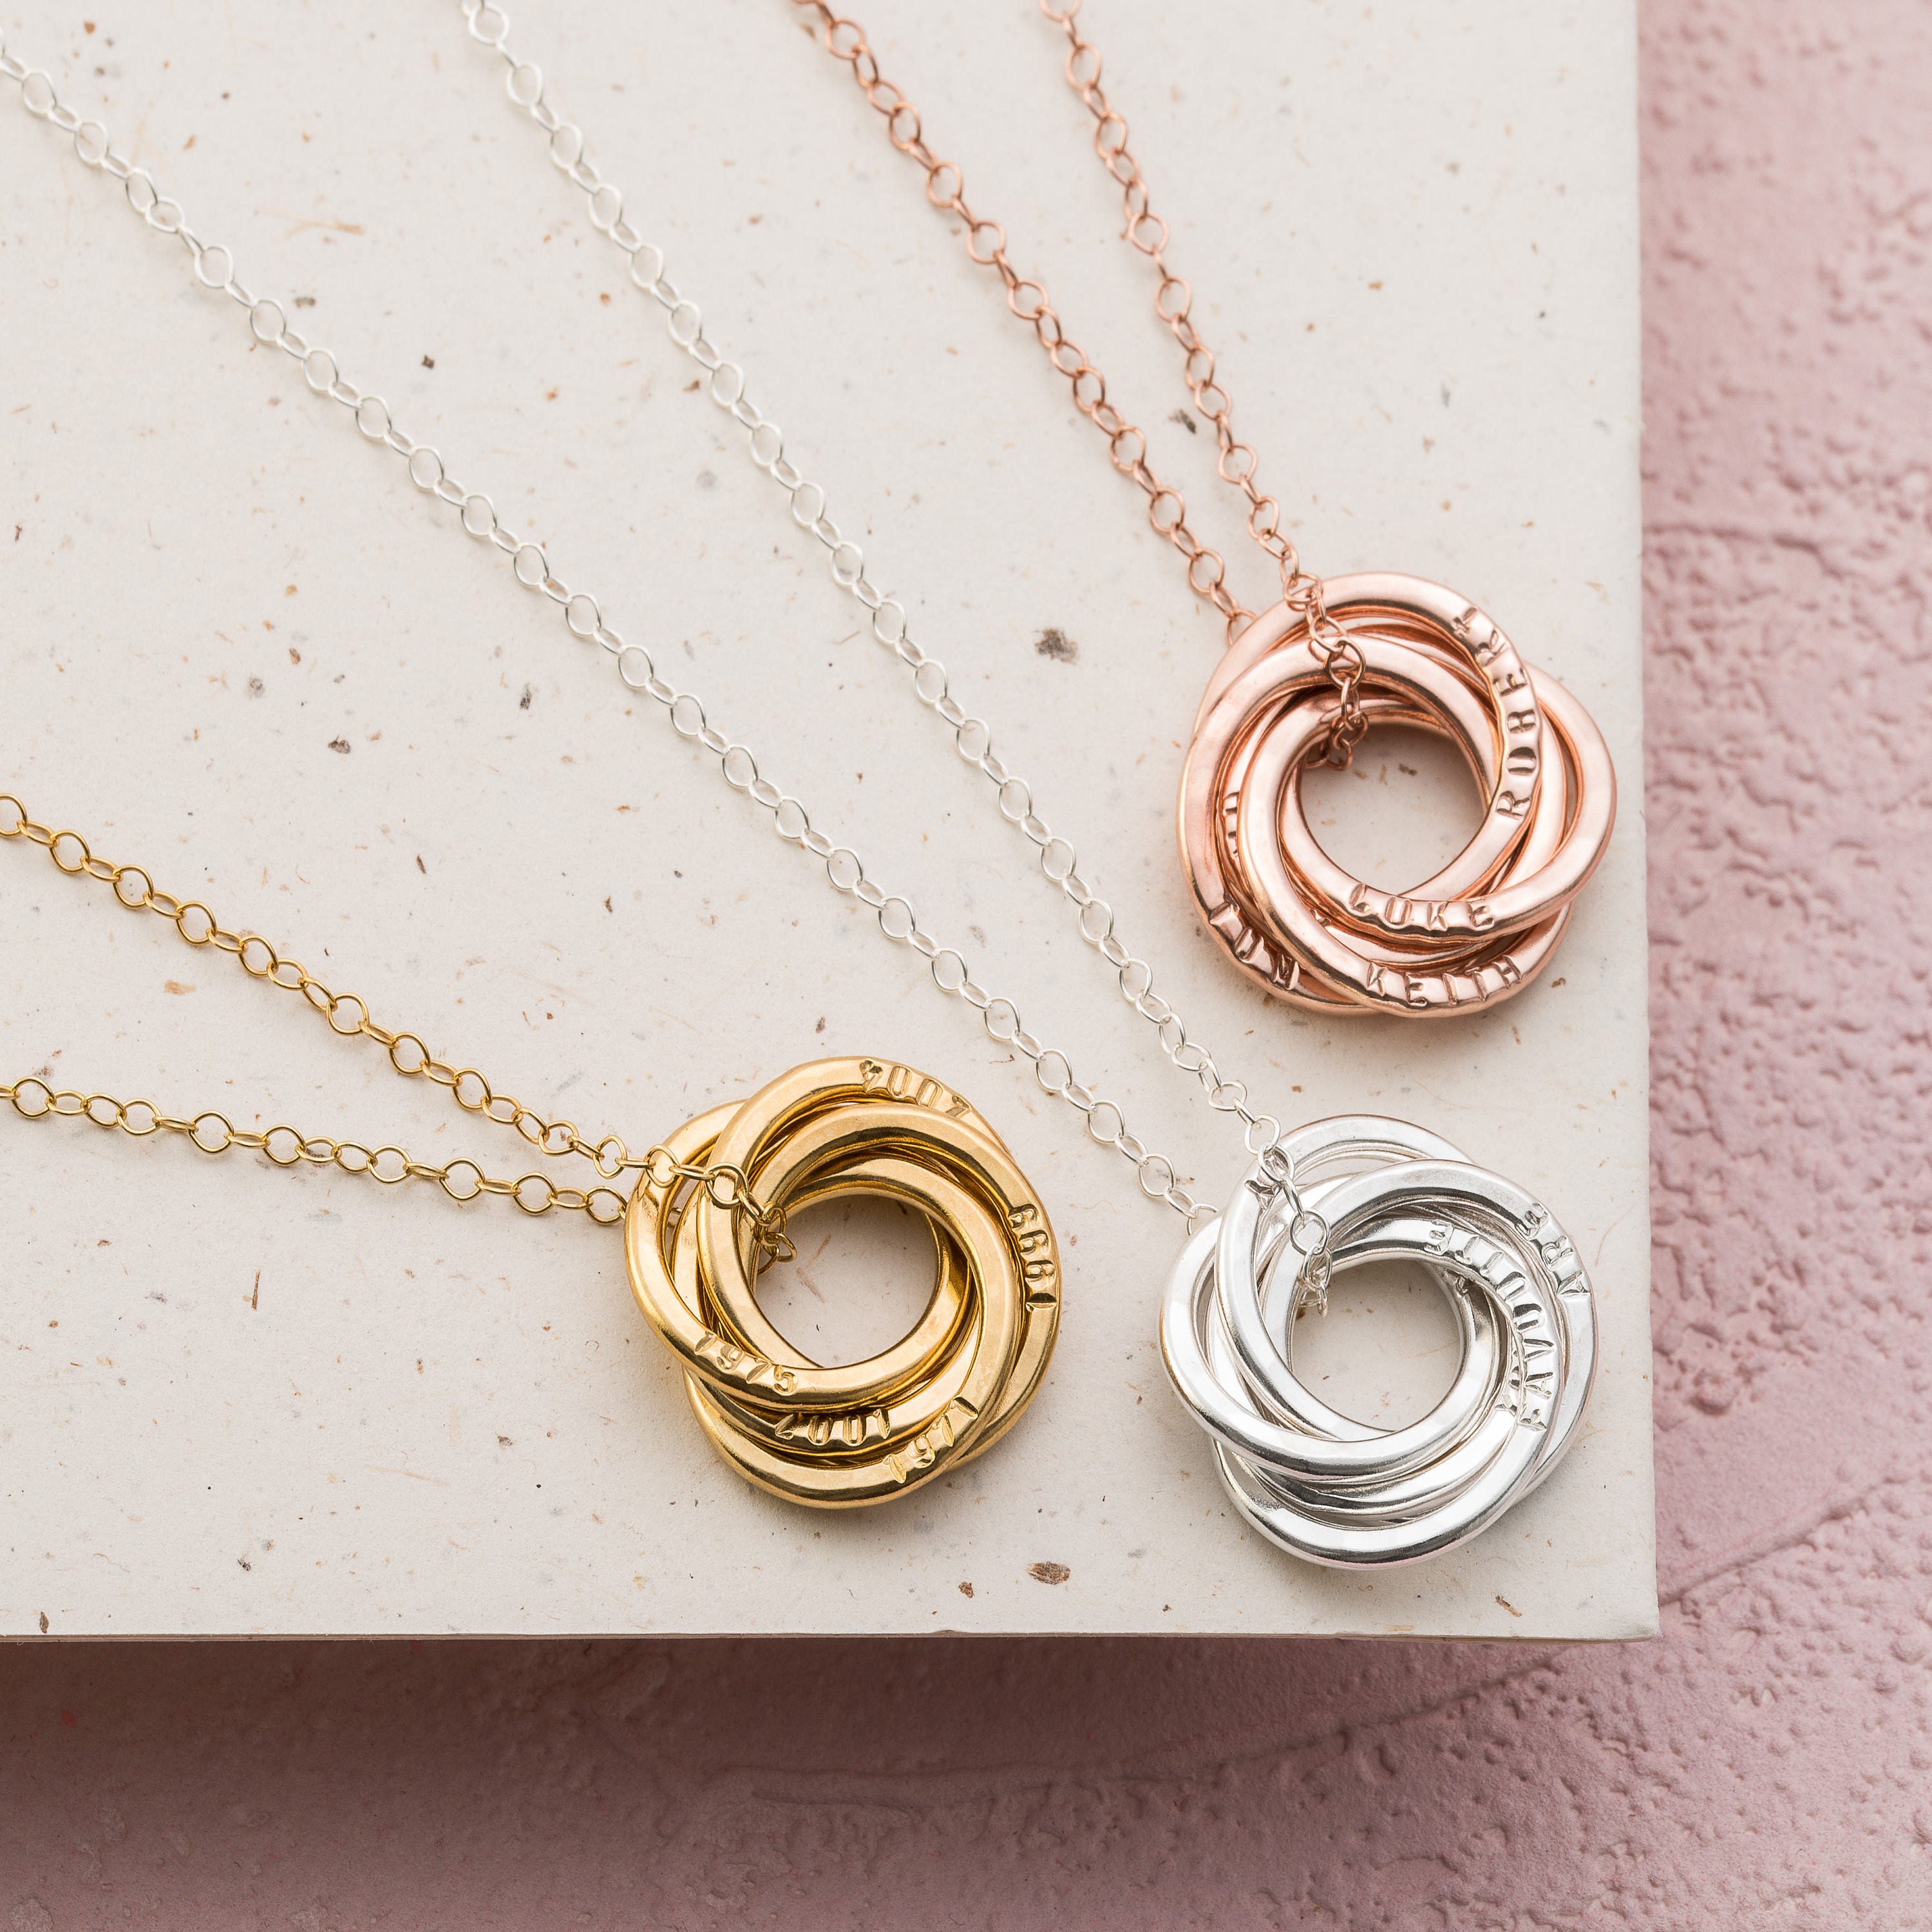 the perfect push present • celebrate a new birth with meaningful family  jewelry